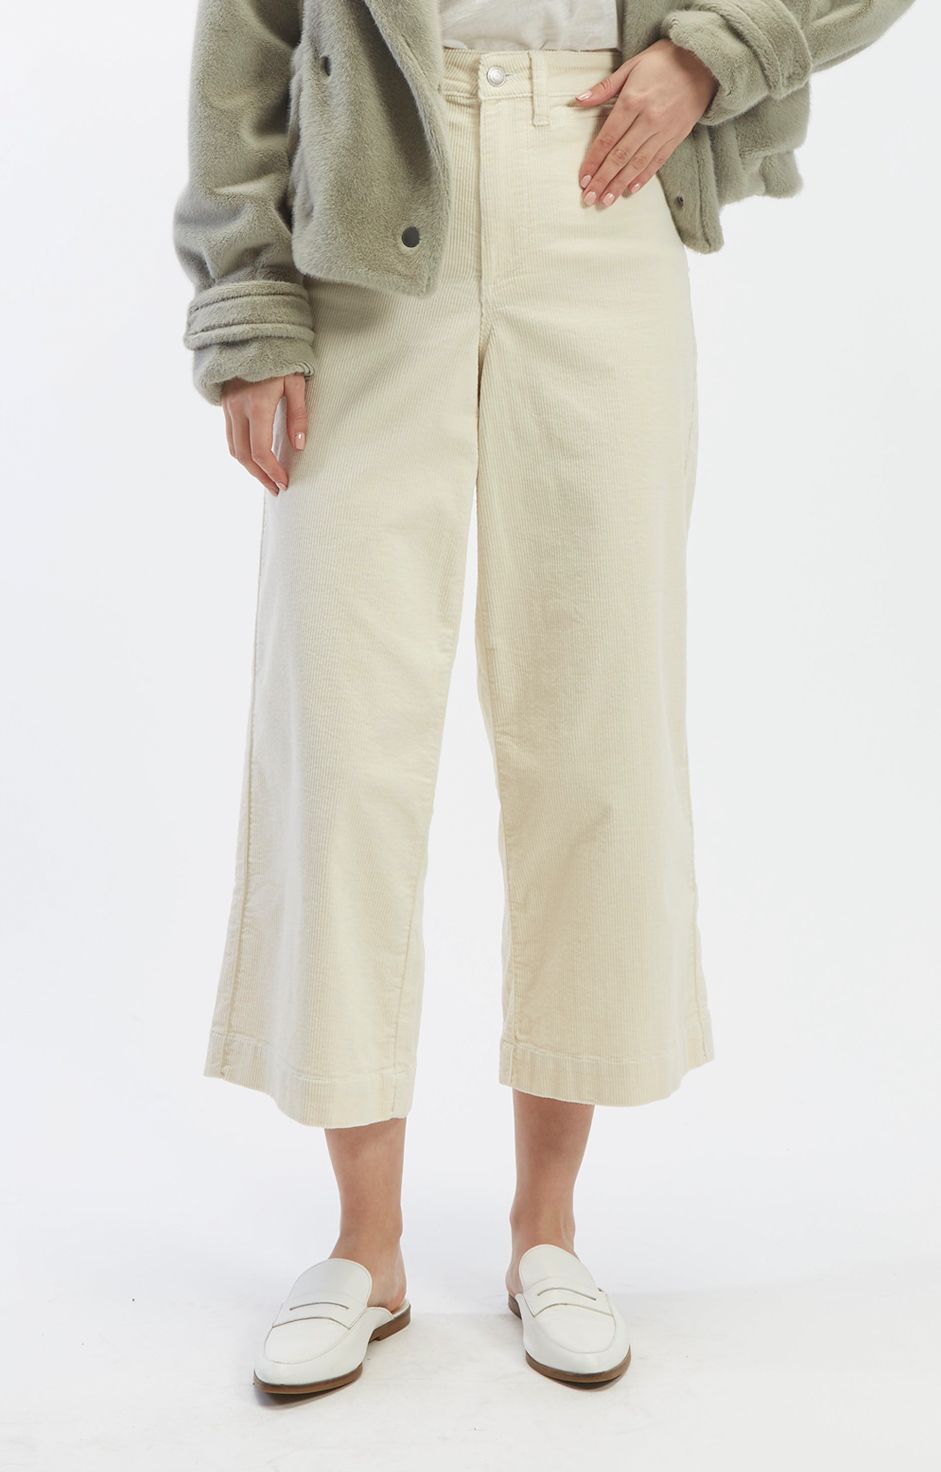 The Greer Corduroy Cropped Wide Leg Pants by OAT NY